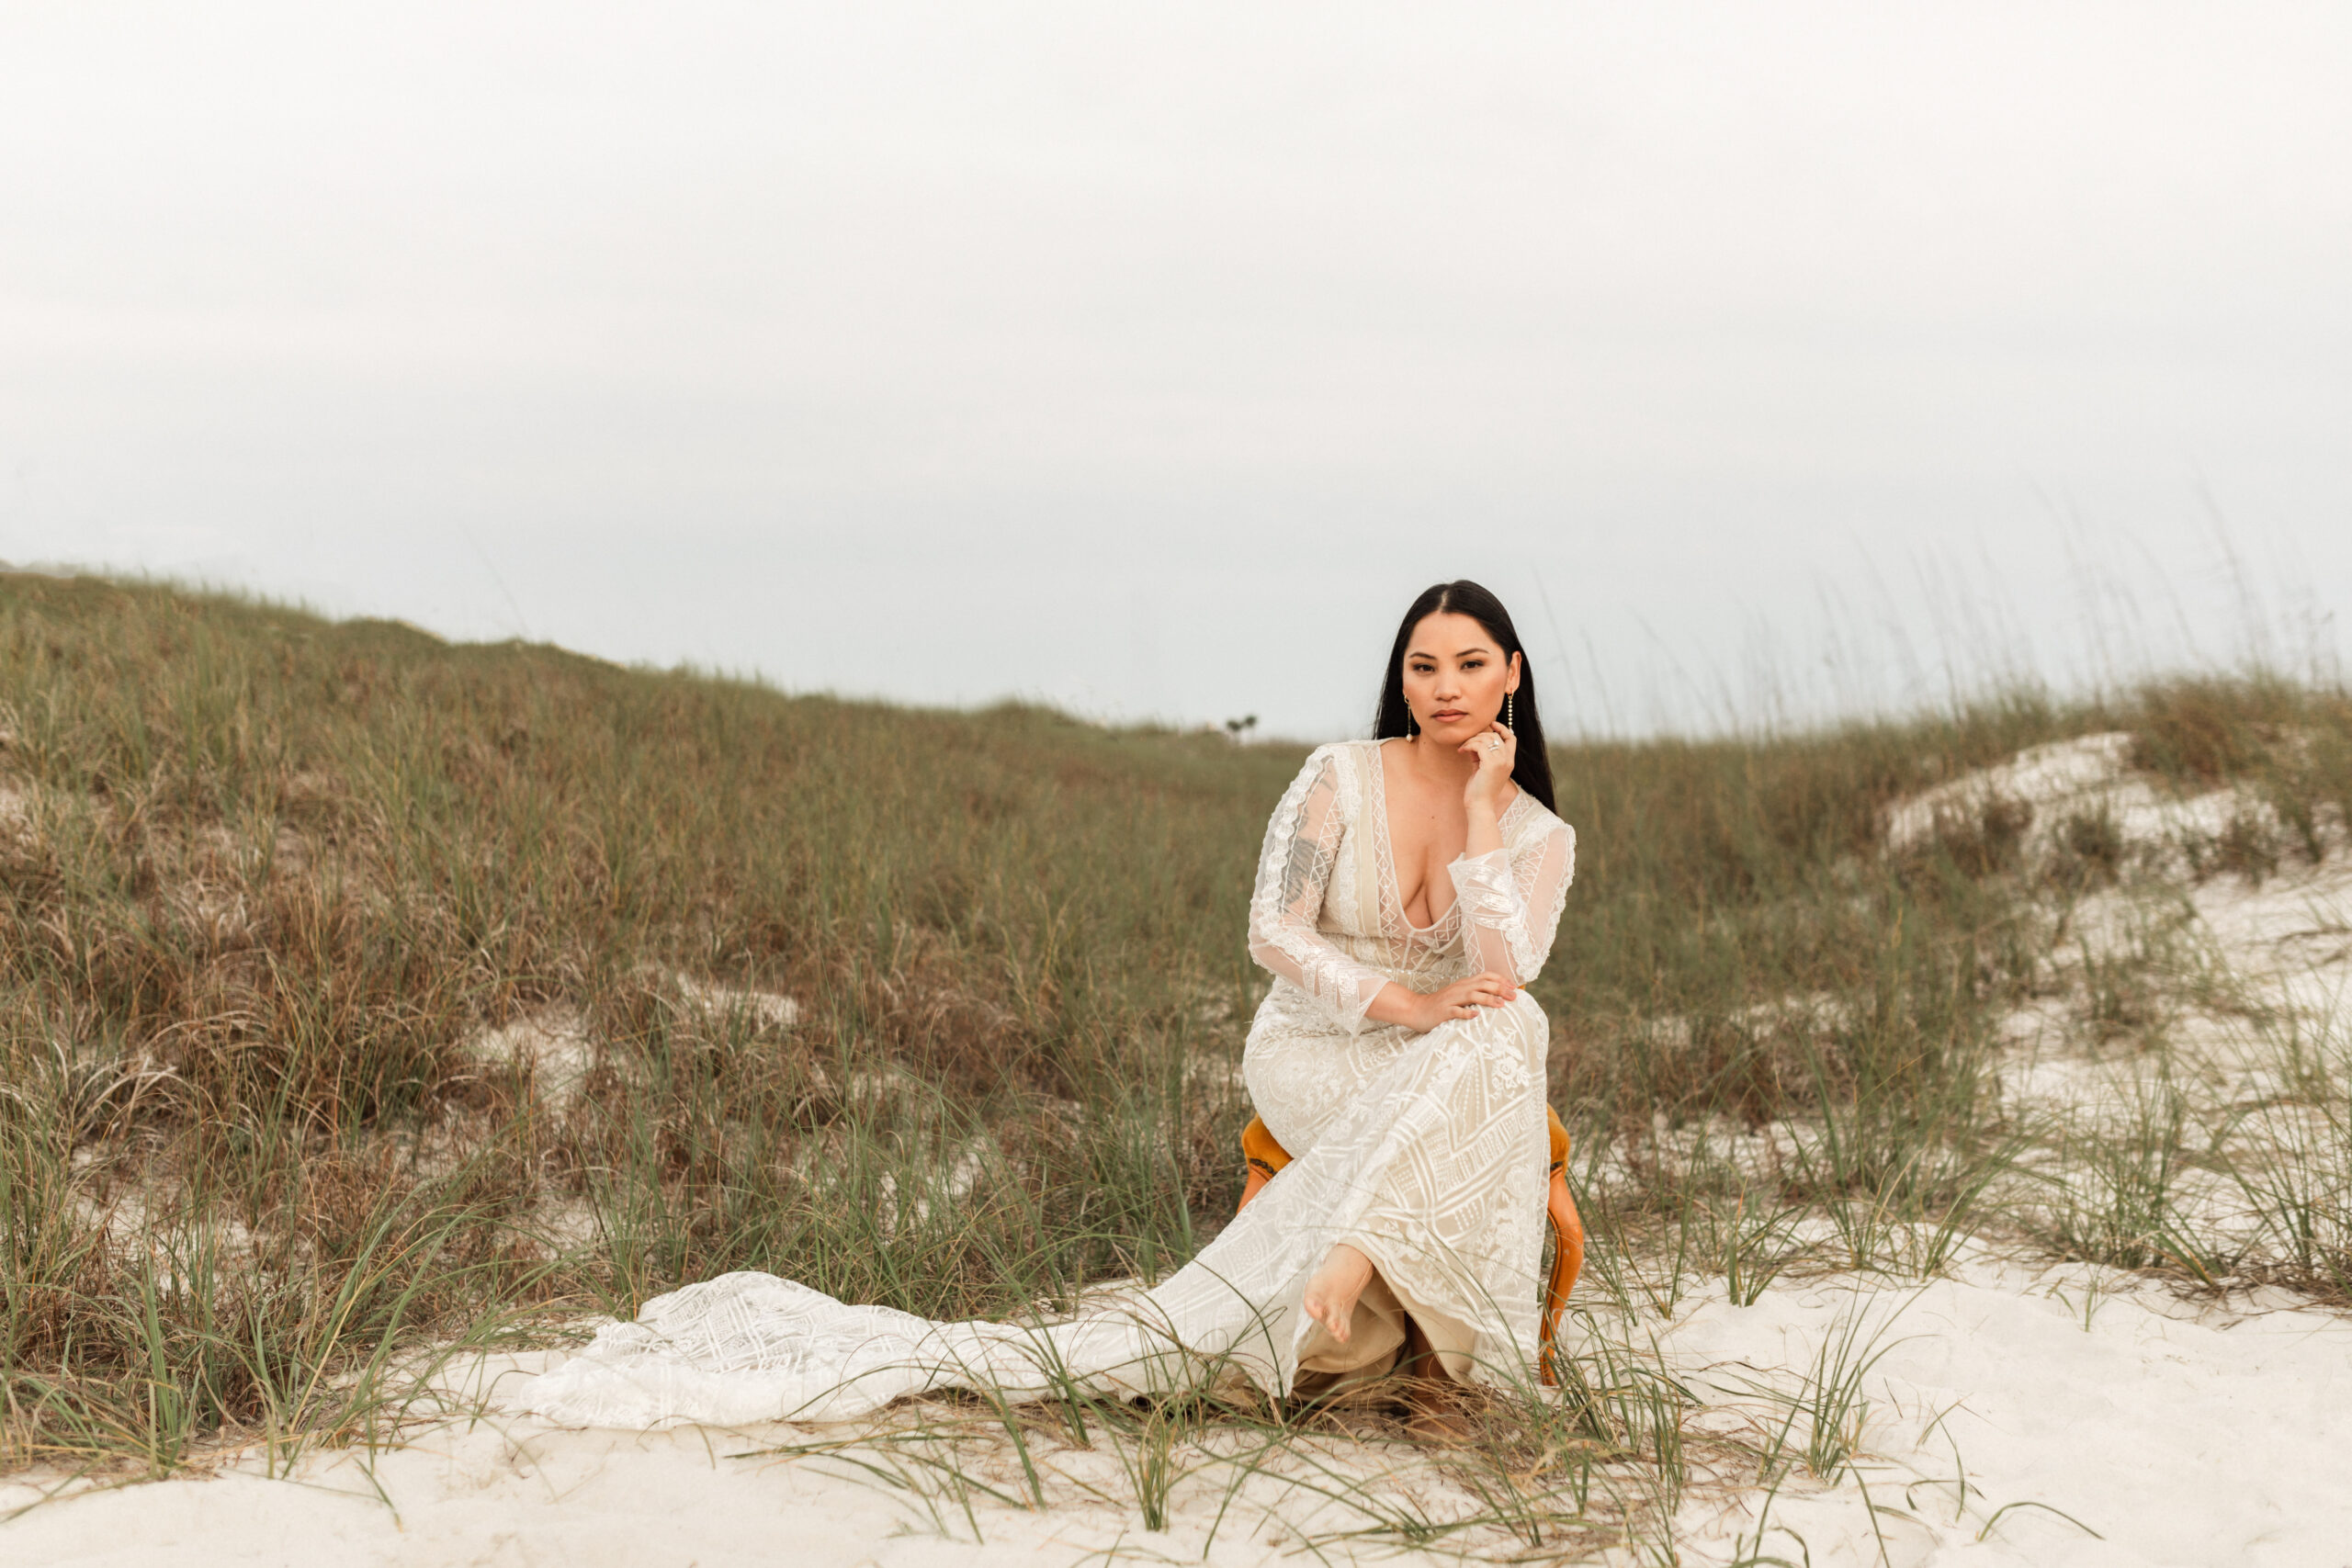 Bride posing regally on sand path in West PCB, Florida - wearing gown & holding flowers